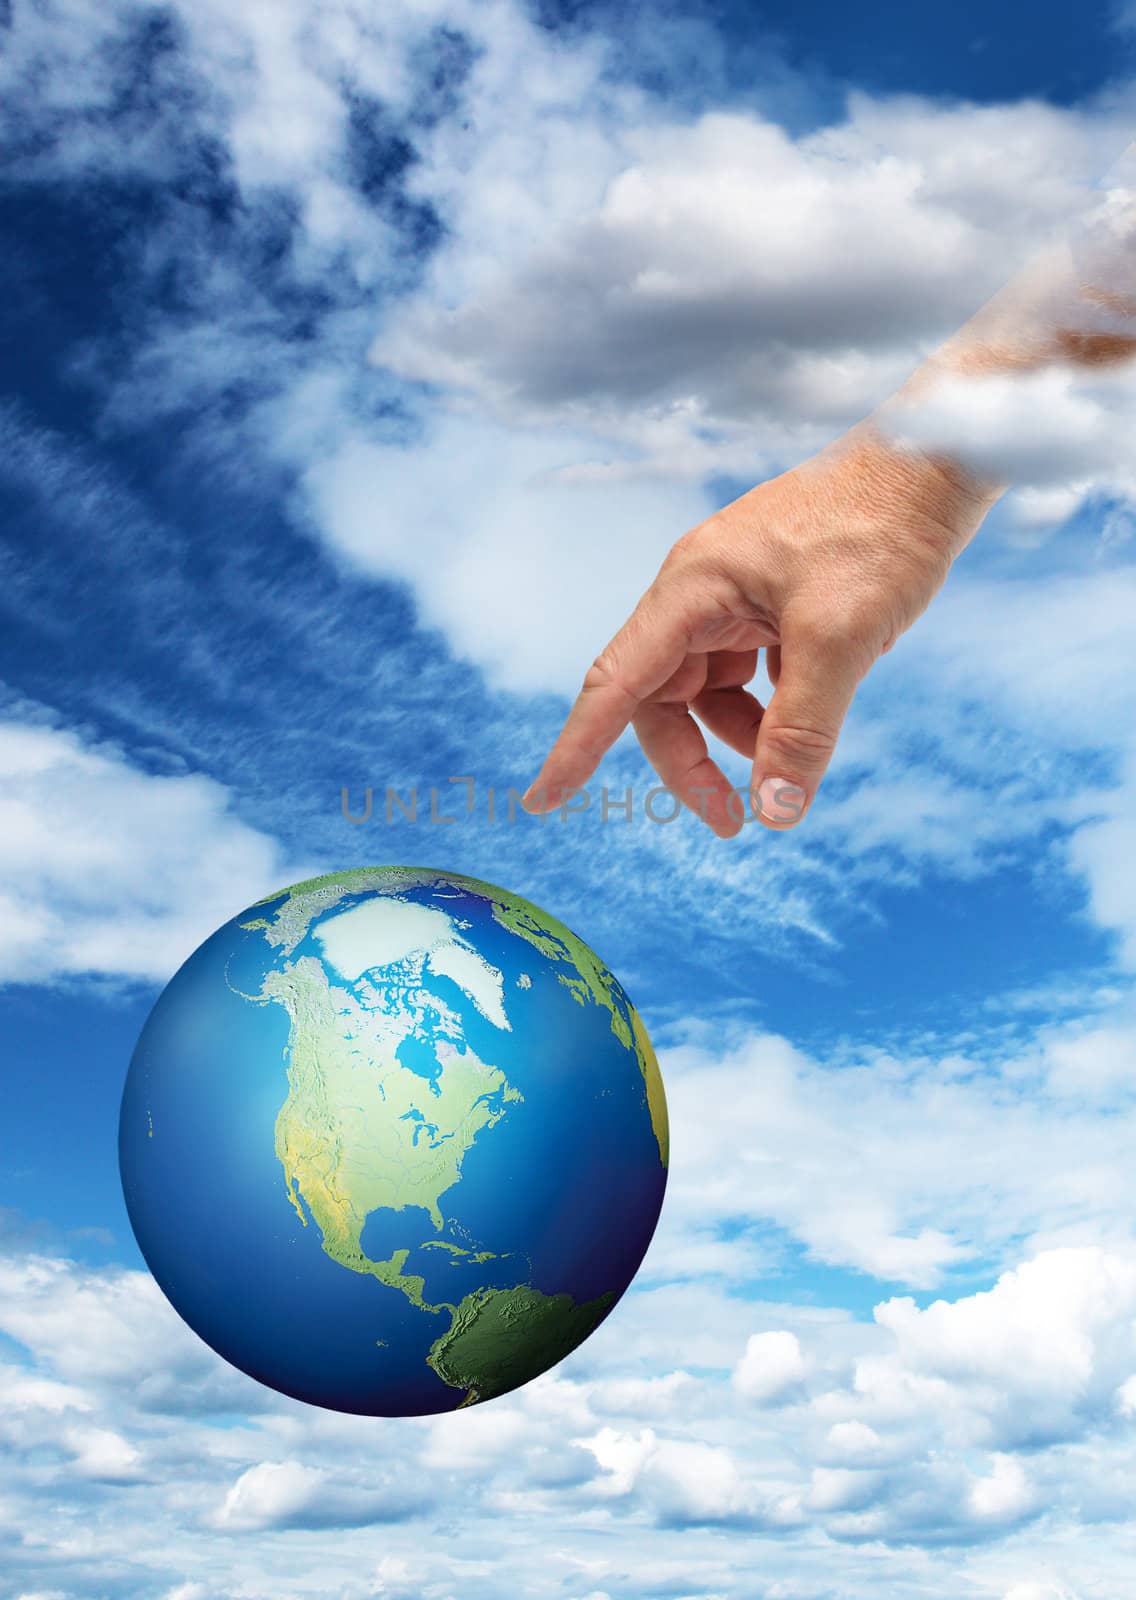 Male hand reaching to touch planet Earth, blue sky background